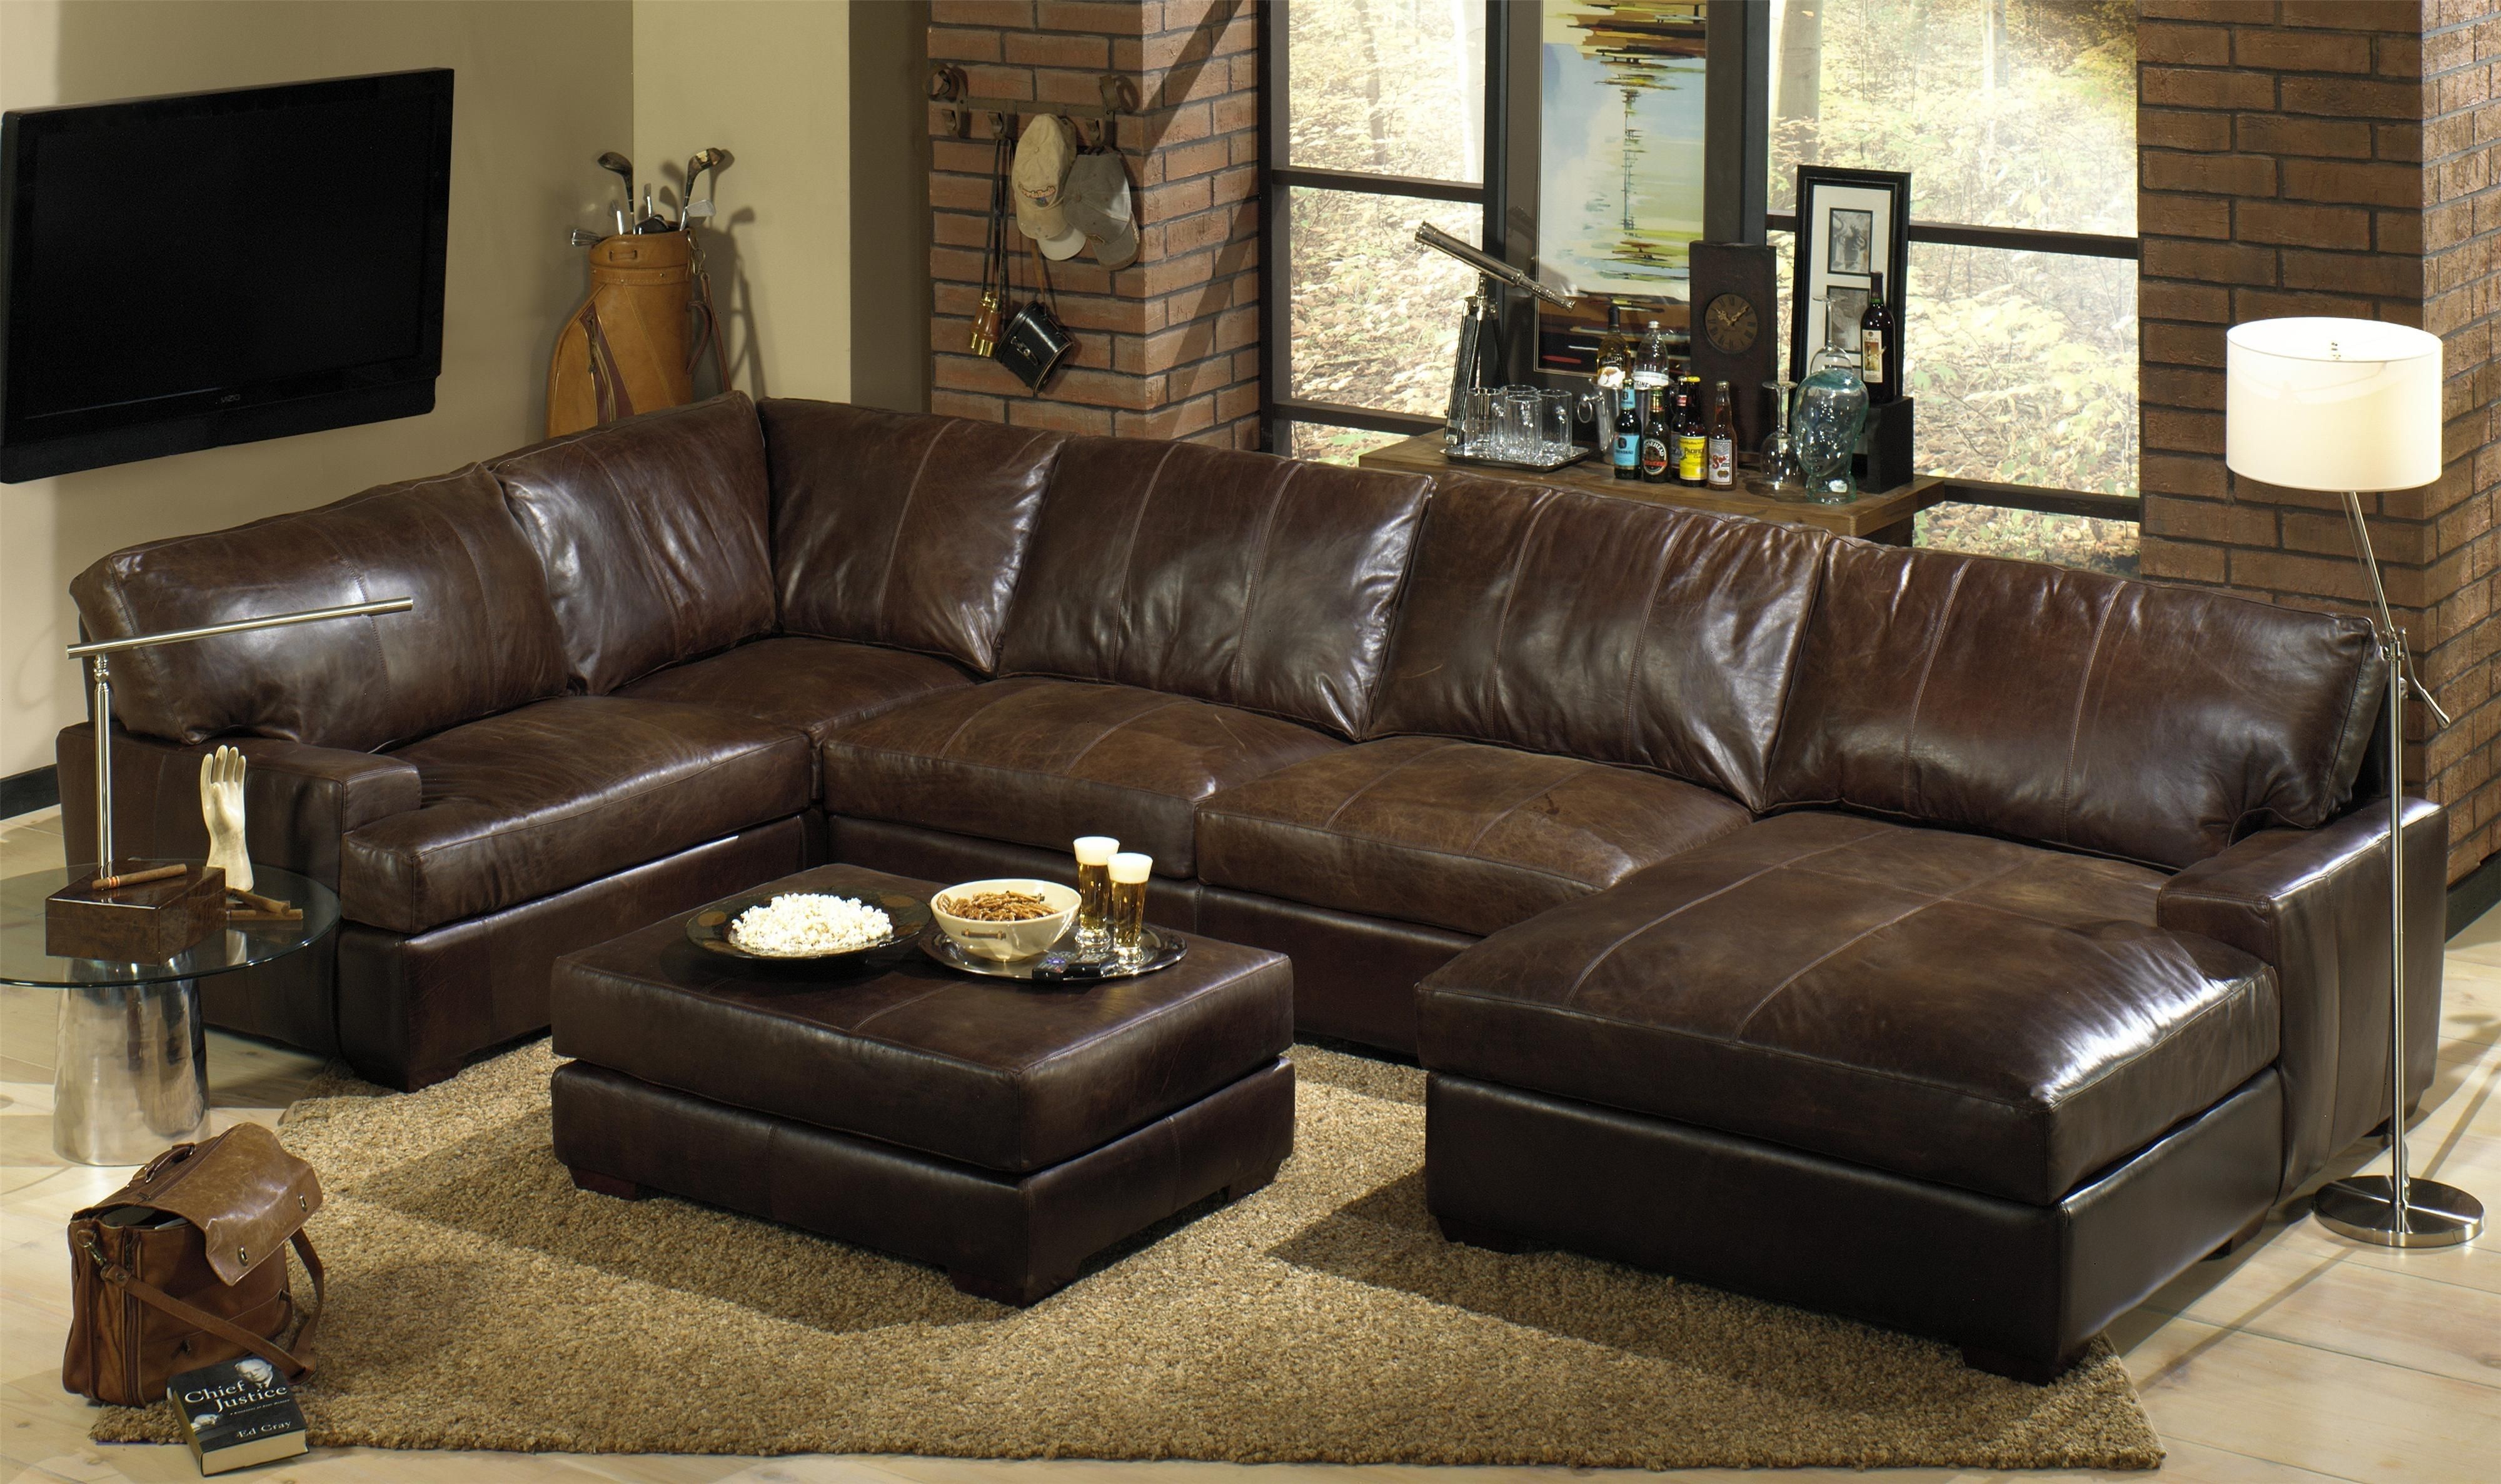 Comfortable Sectional Couches For Versatile Home Furniture Ideas Regarding Collins Sofa Sectionals With Reversible Chaise (View 15 of 30)